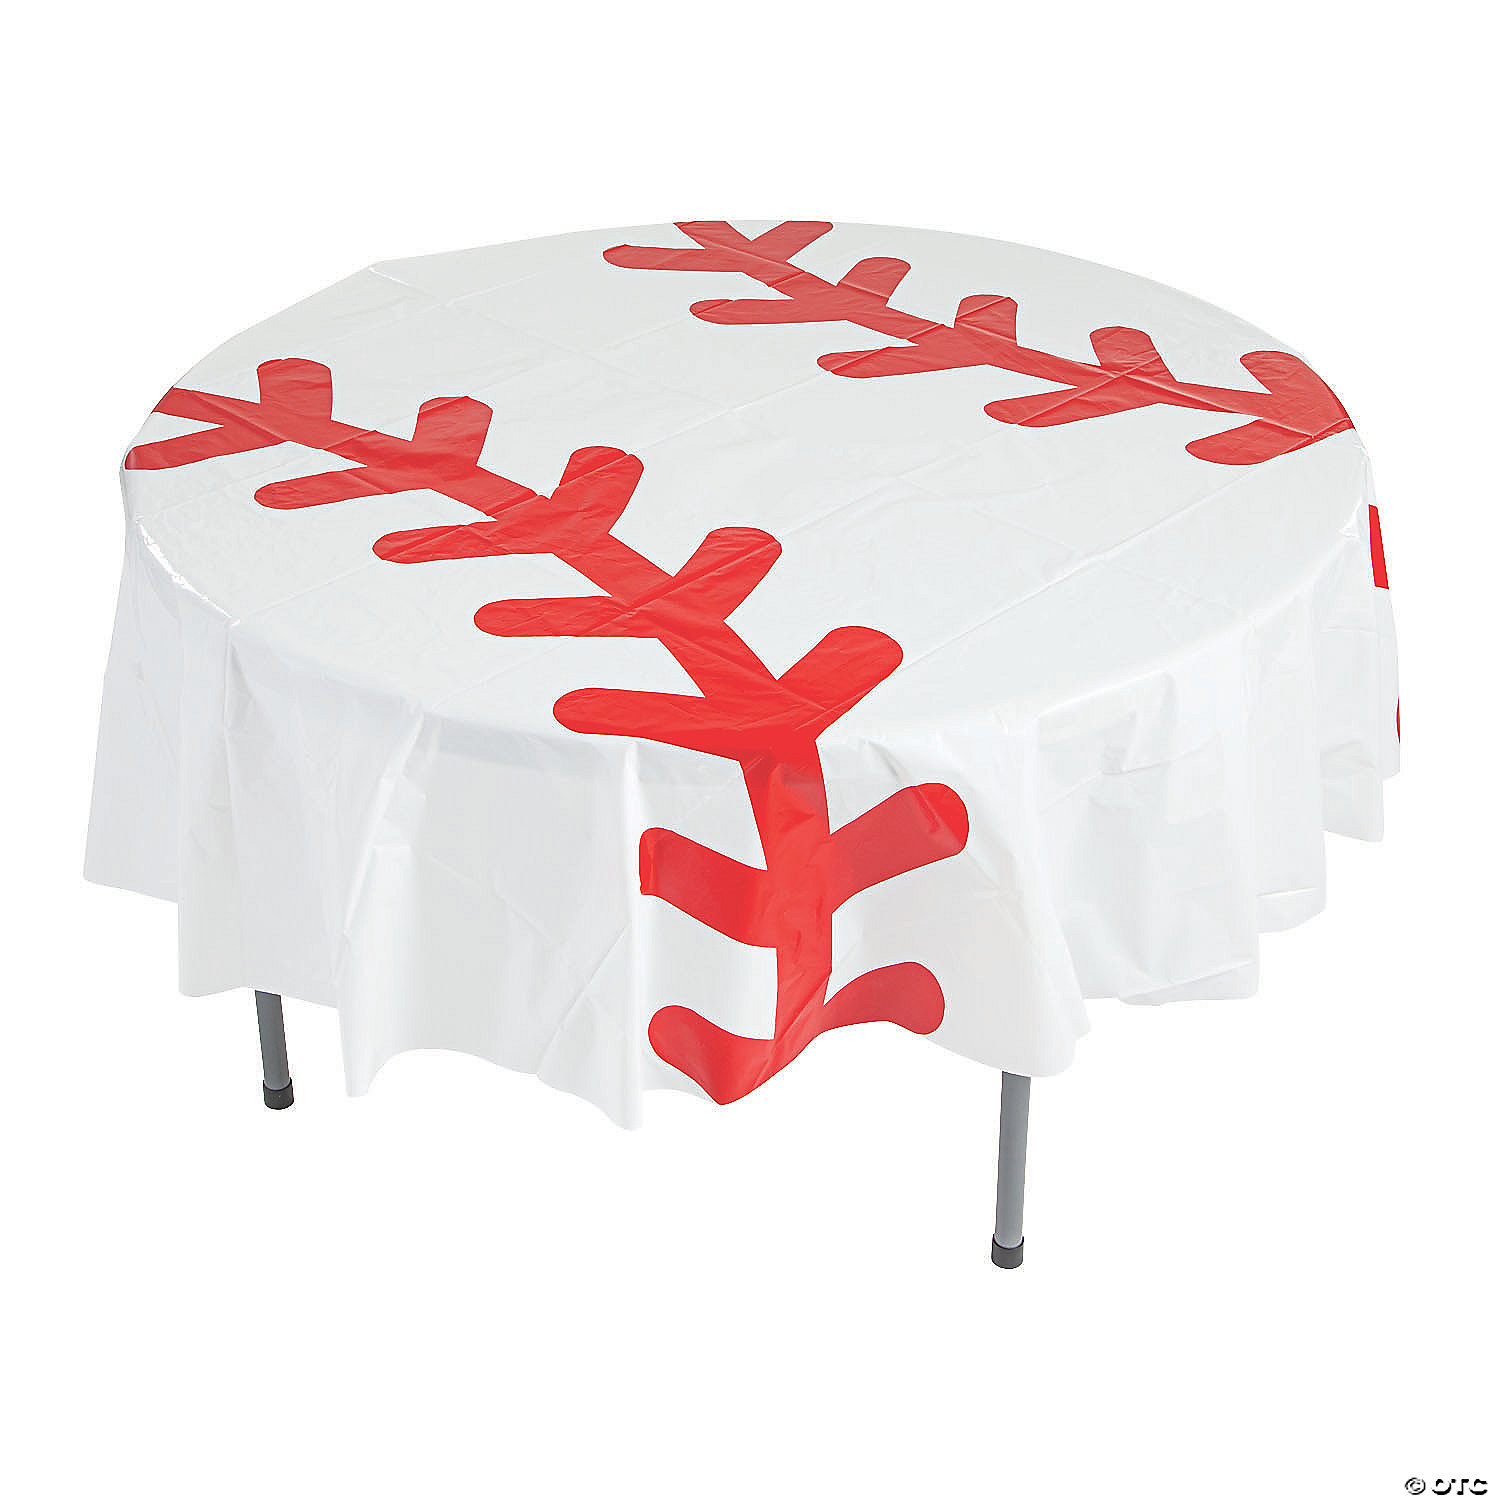 School Event Decoration Birthday Party Foil Baseball Balloon and Printed Tablecloth for Baseball Event Outdoor Event Baseball Theme Party Supplies Set Baseball Pattern Table Cover with 6 PCS Baseball Balloons Set 